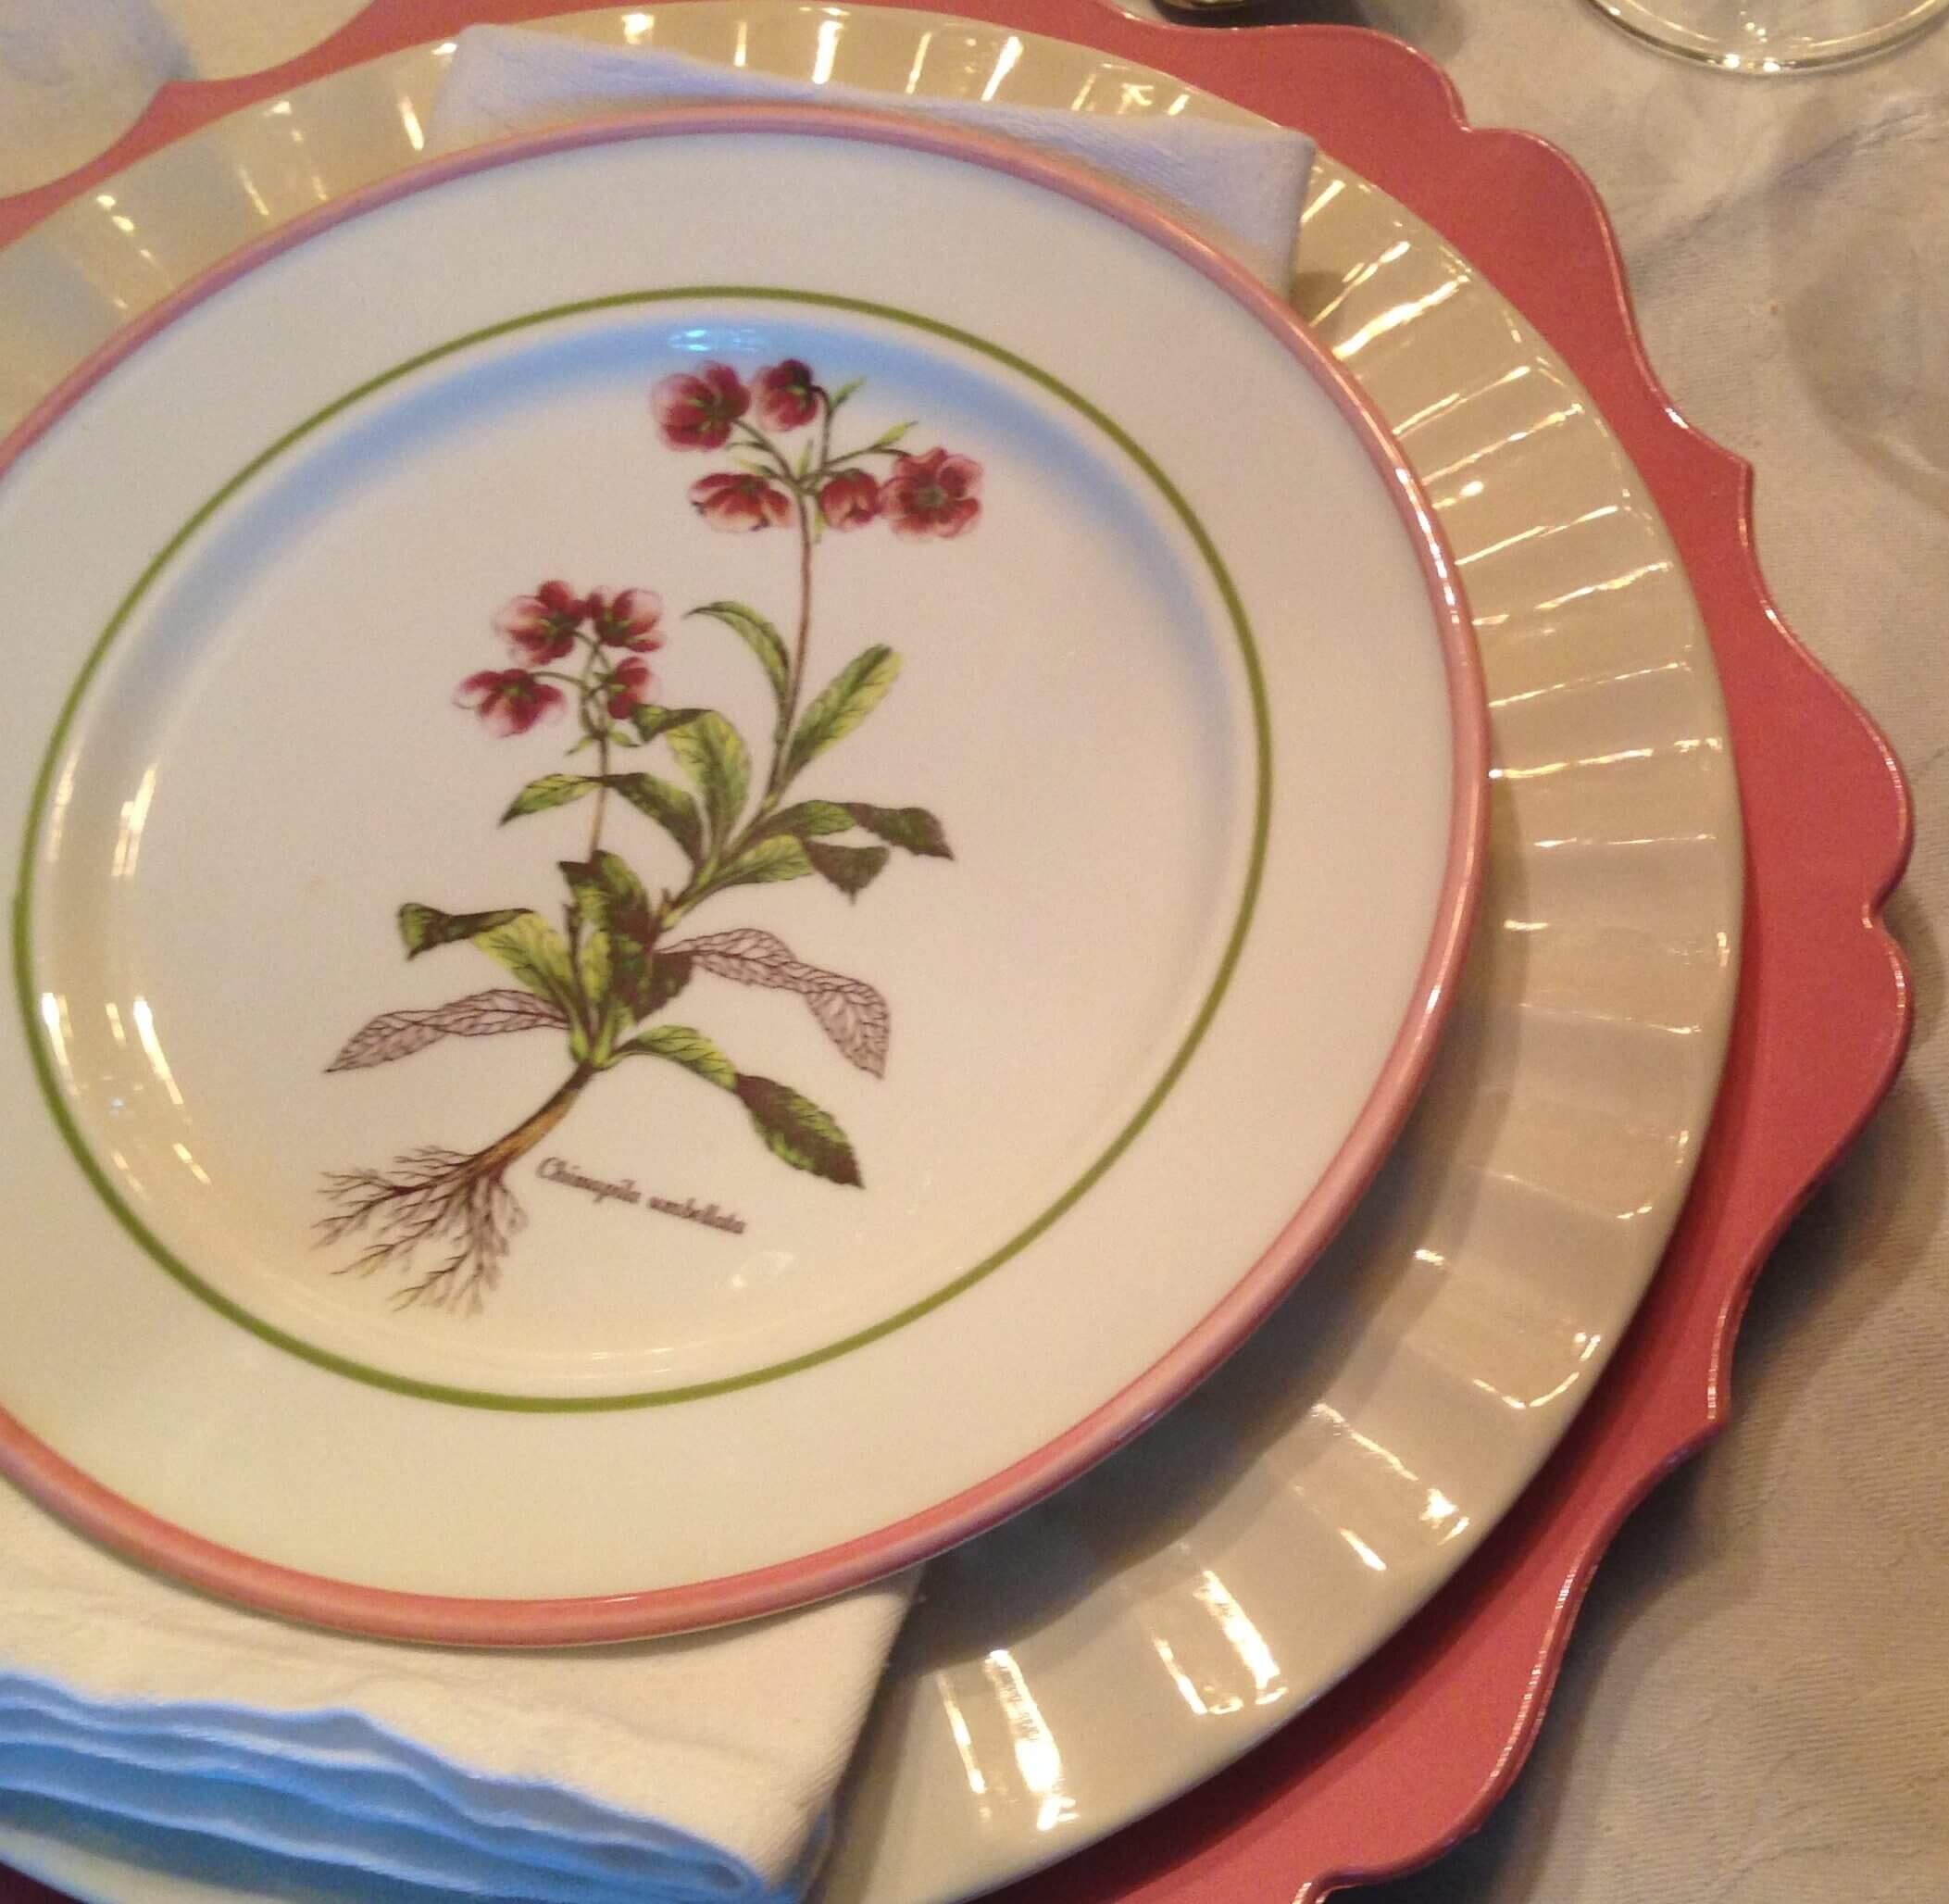 botanical+salad+plate+and+scalloped+pink+charger+sandwich+an+everyday+white+dinner+plate.jpg